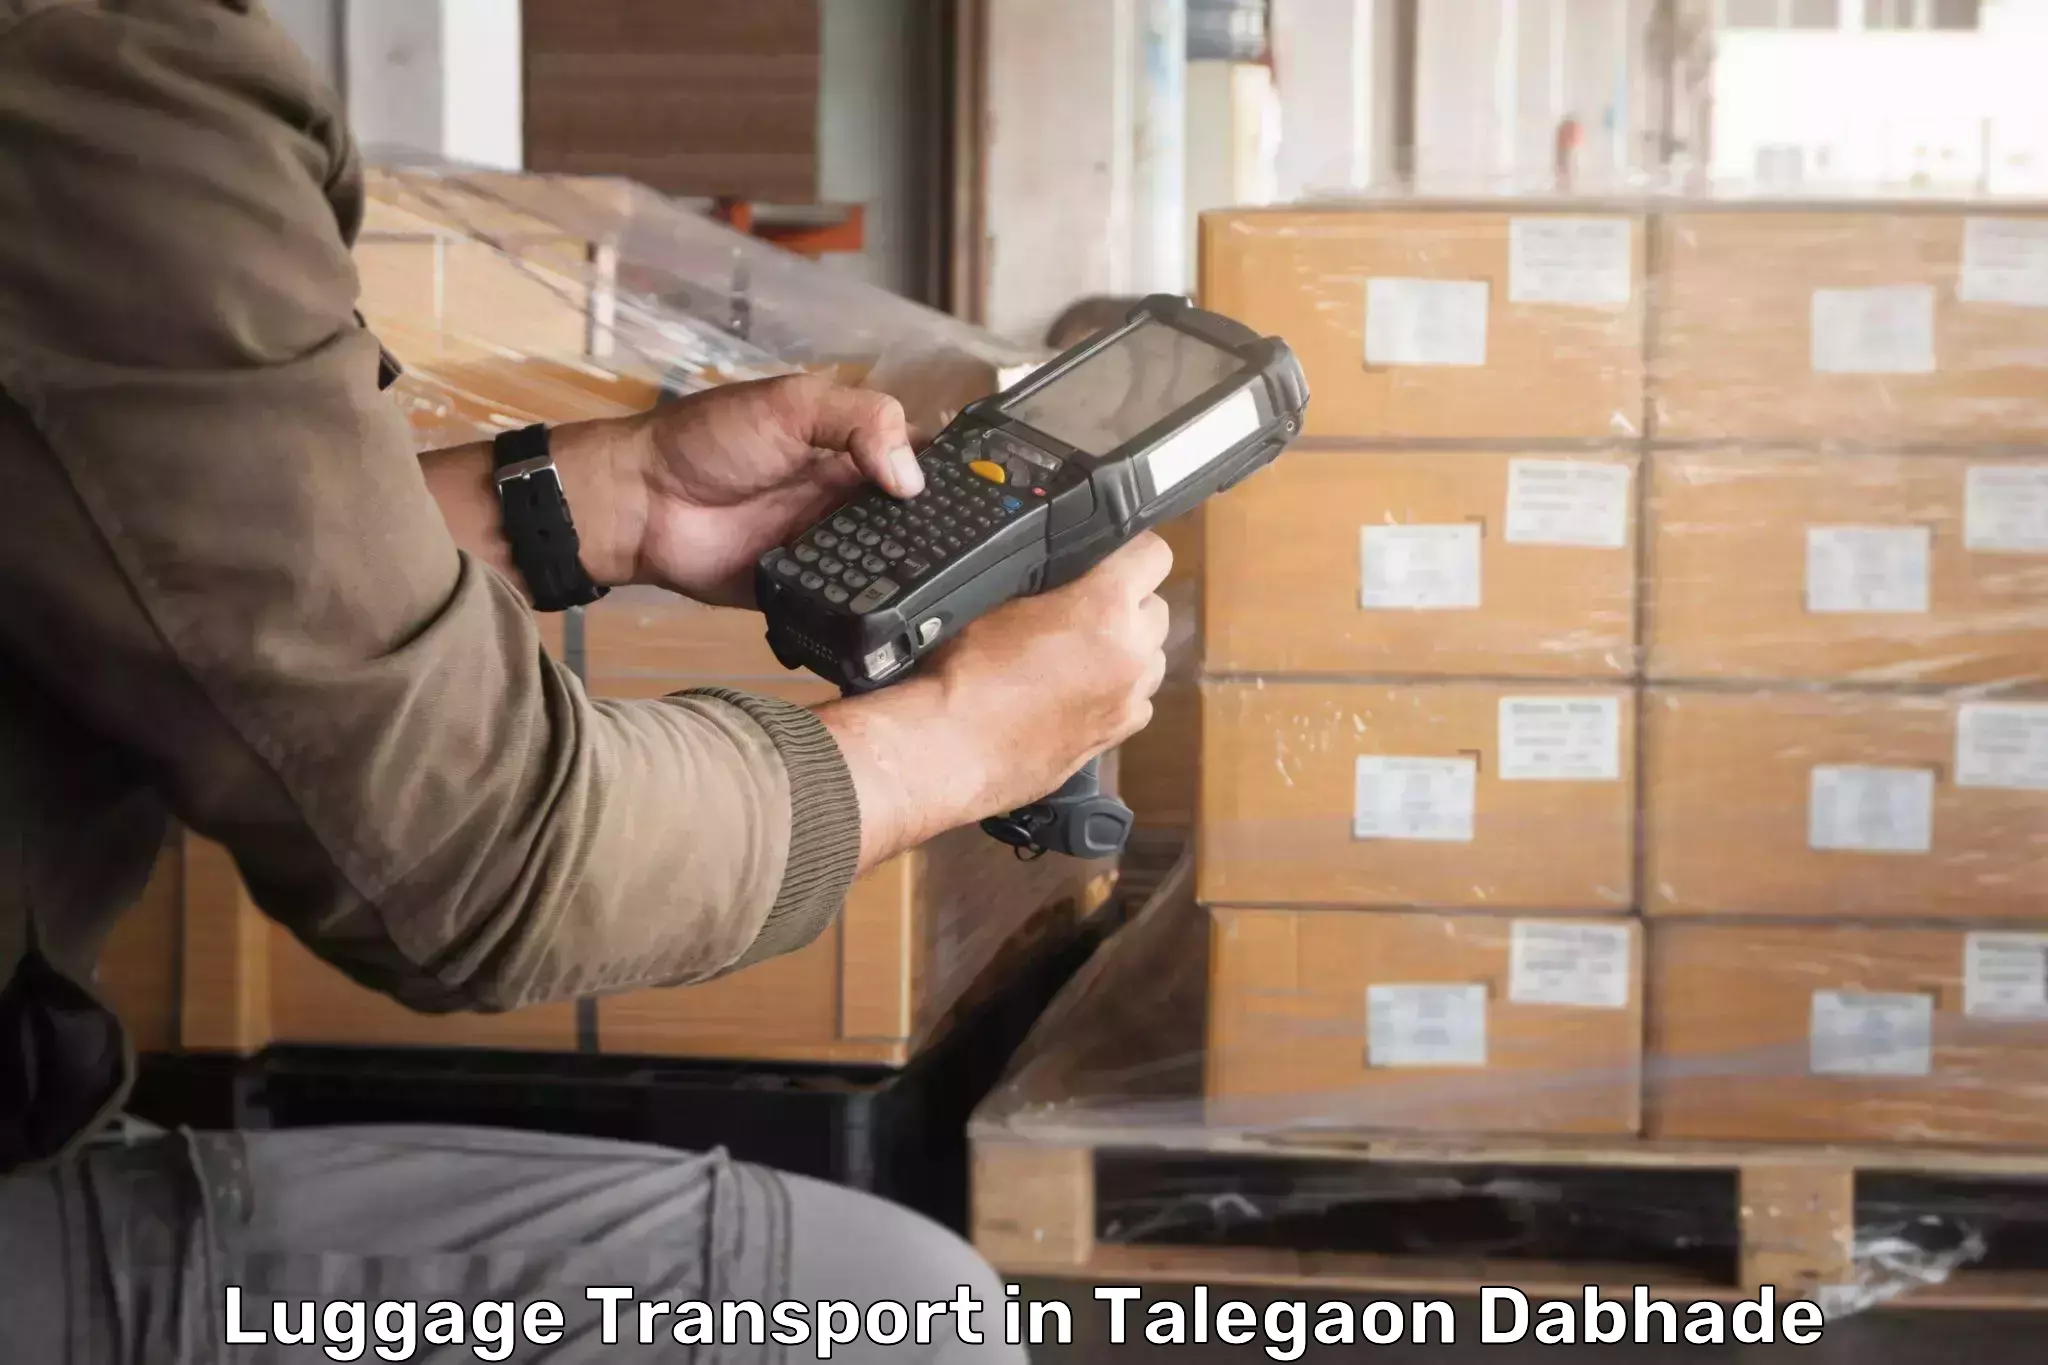 Luggage shipping management in Talegaon Dabhade